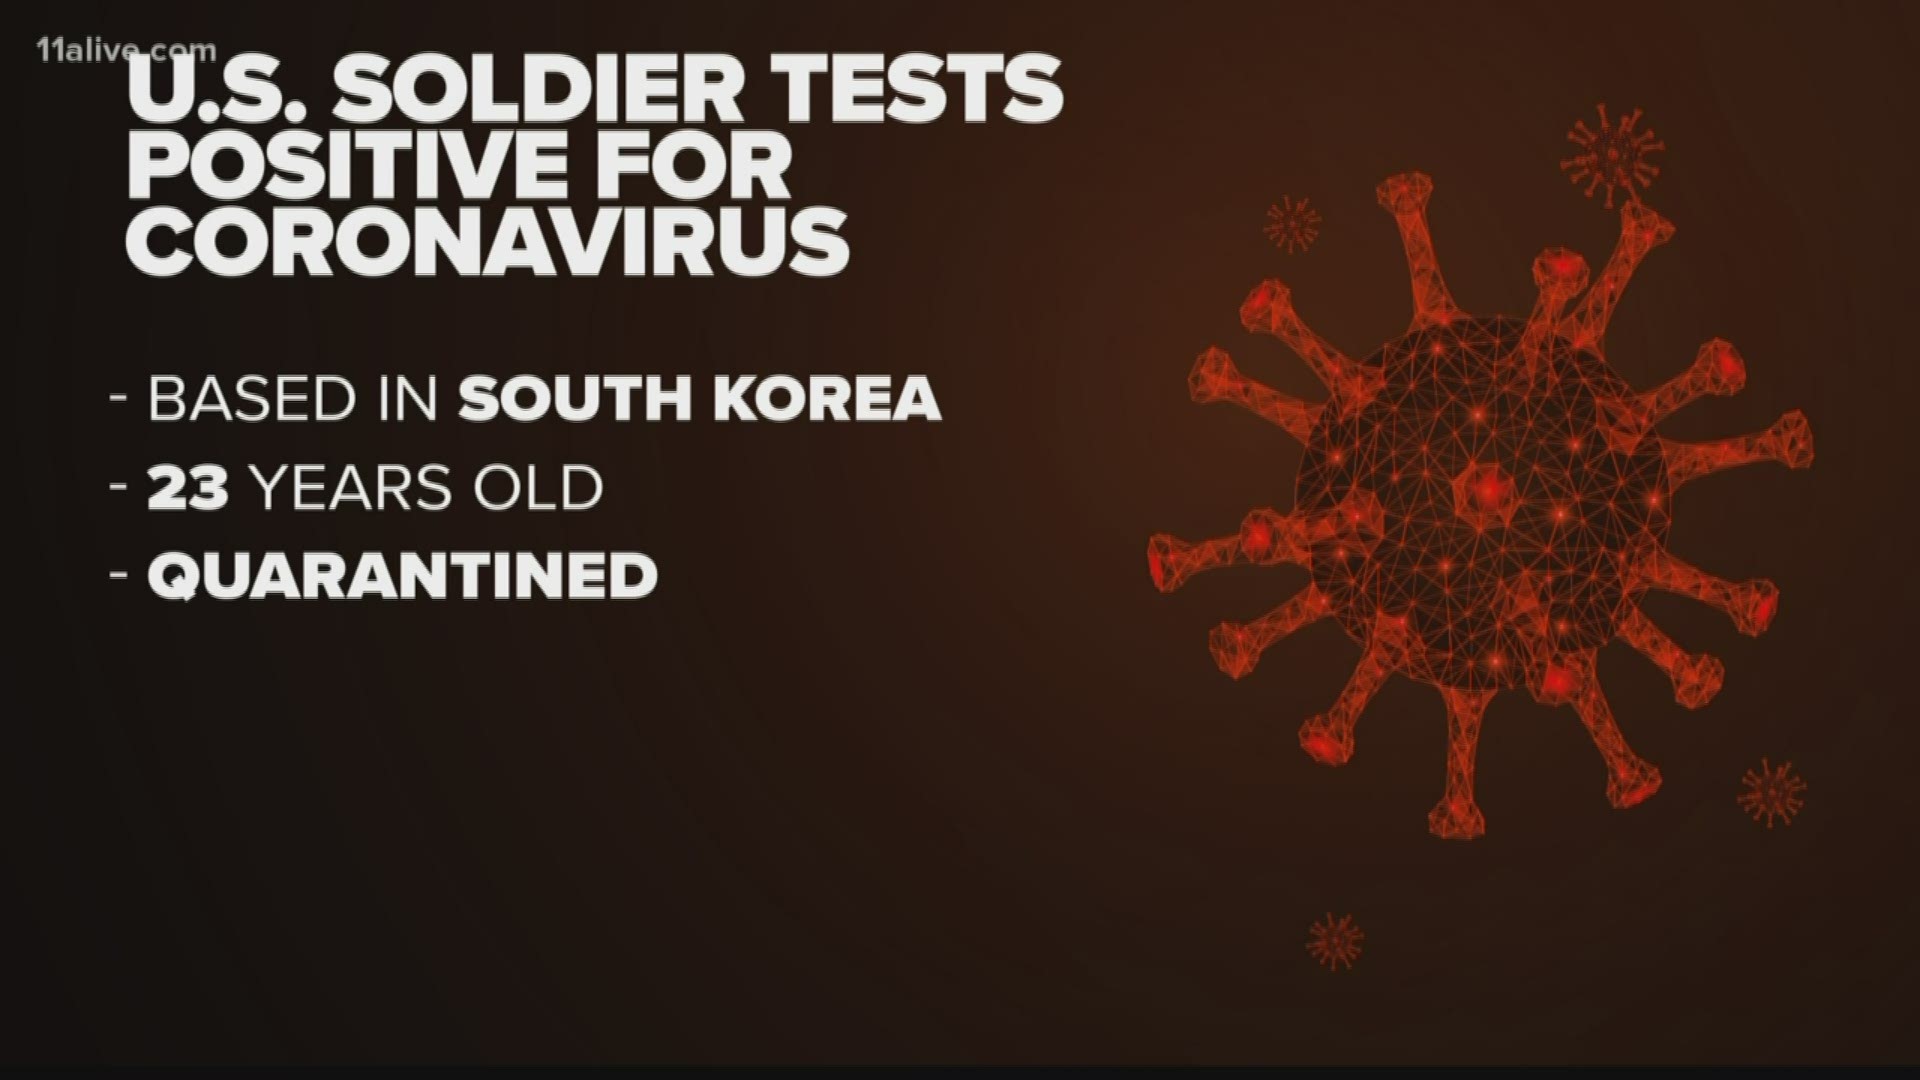 New virus cases in South Korea jumped again and the first U.S. military soldier tested positive.